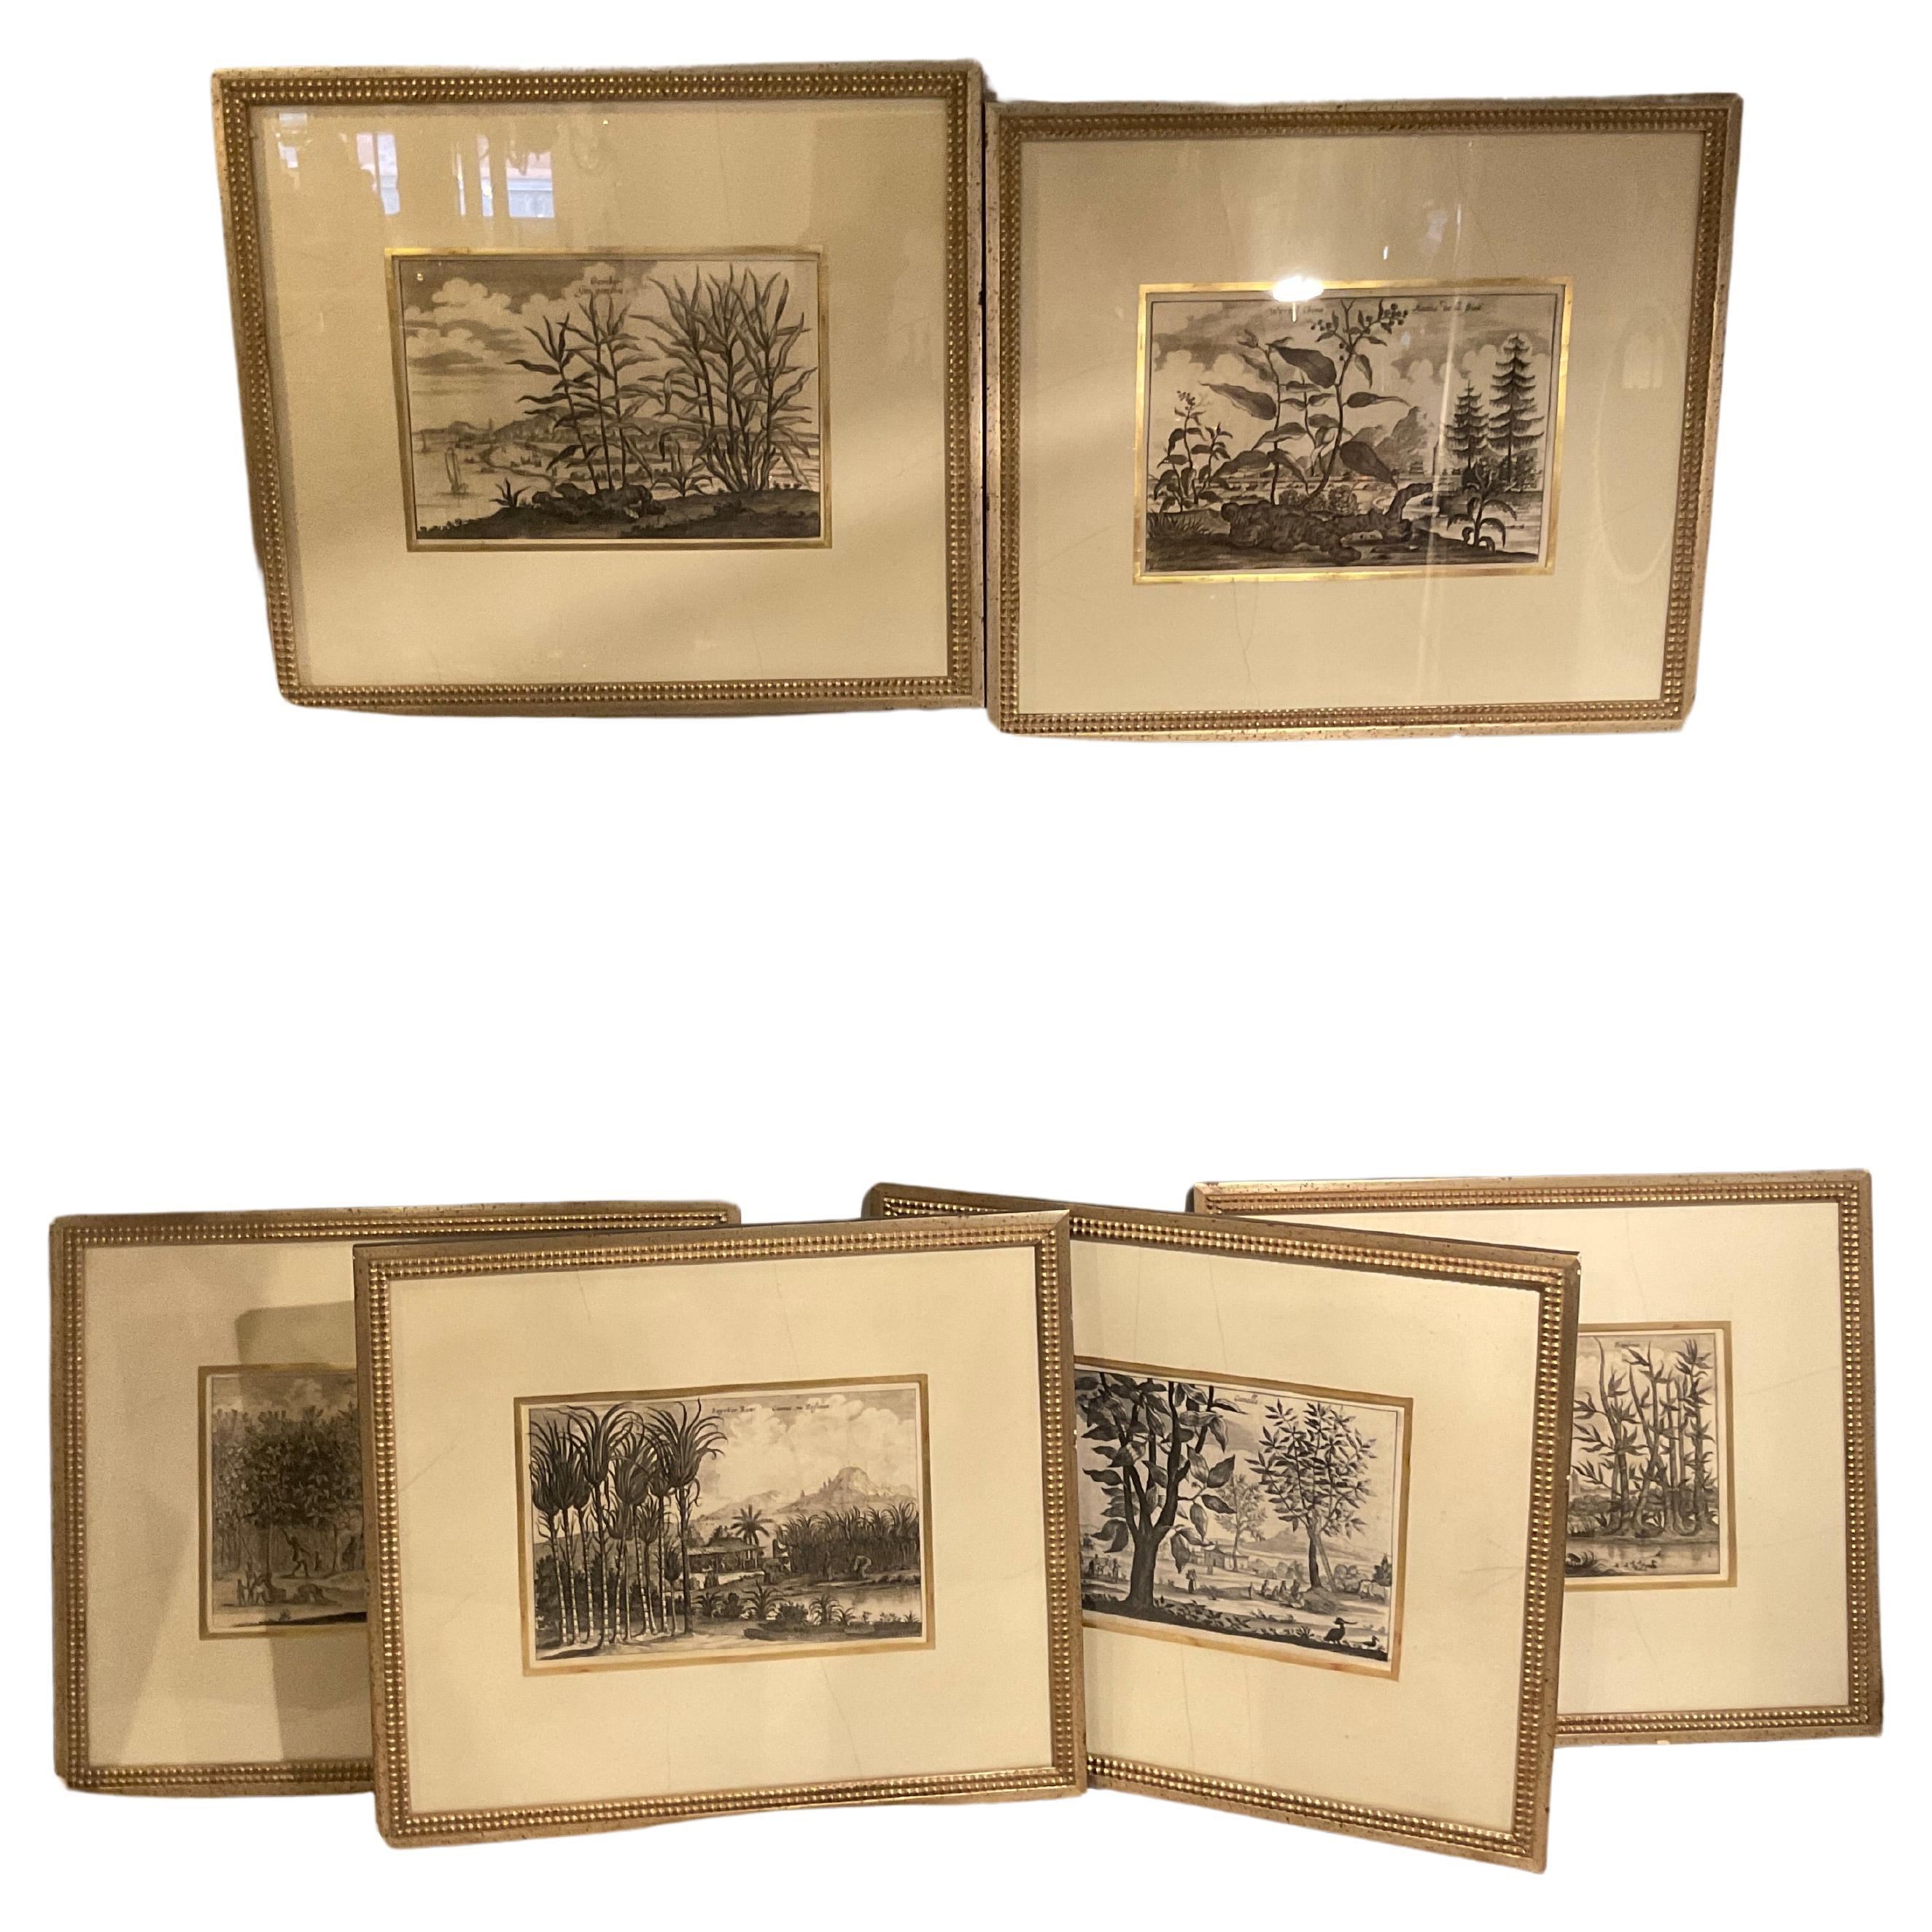 6 Soicher- Marin Tropical Landscape From Asia Prints In Silver Leaf Frames For Sale